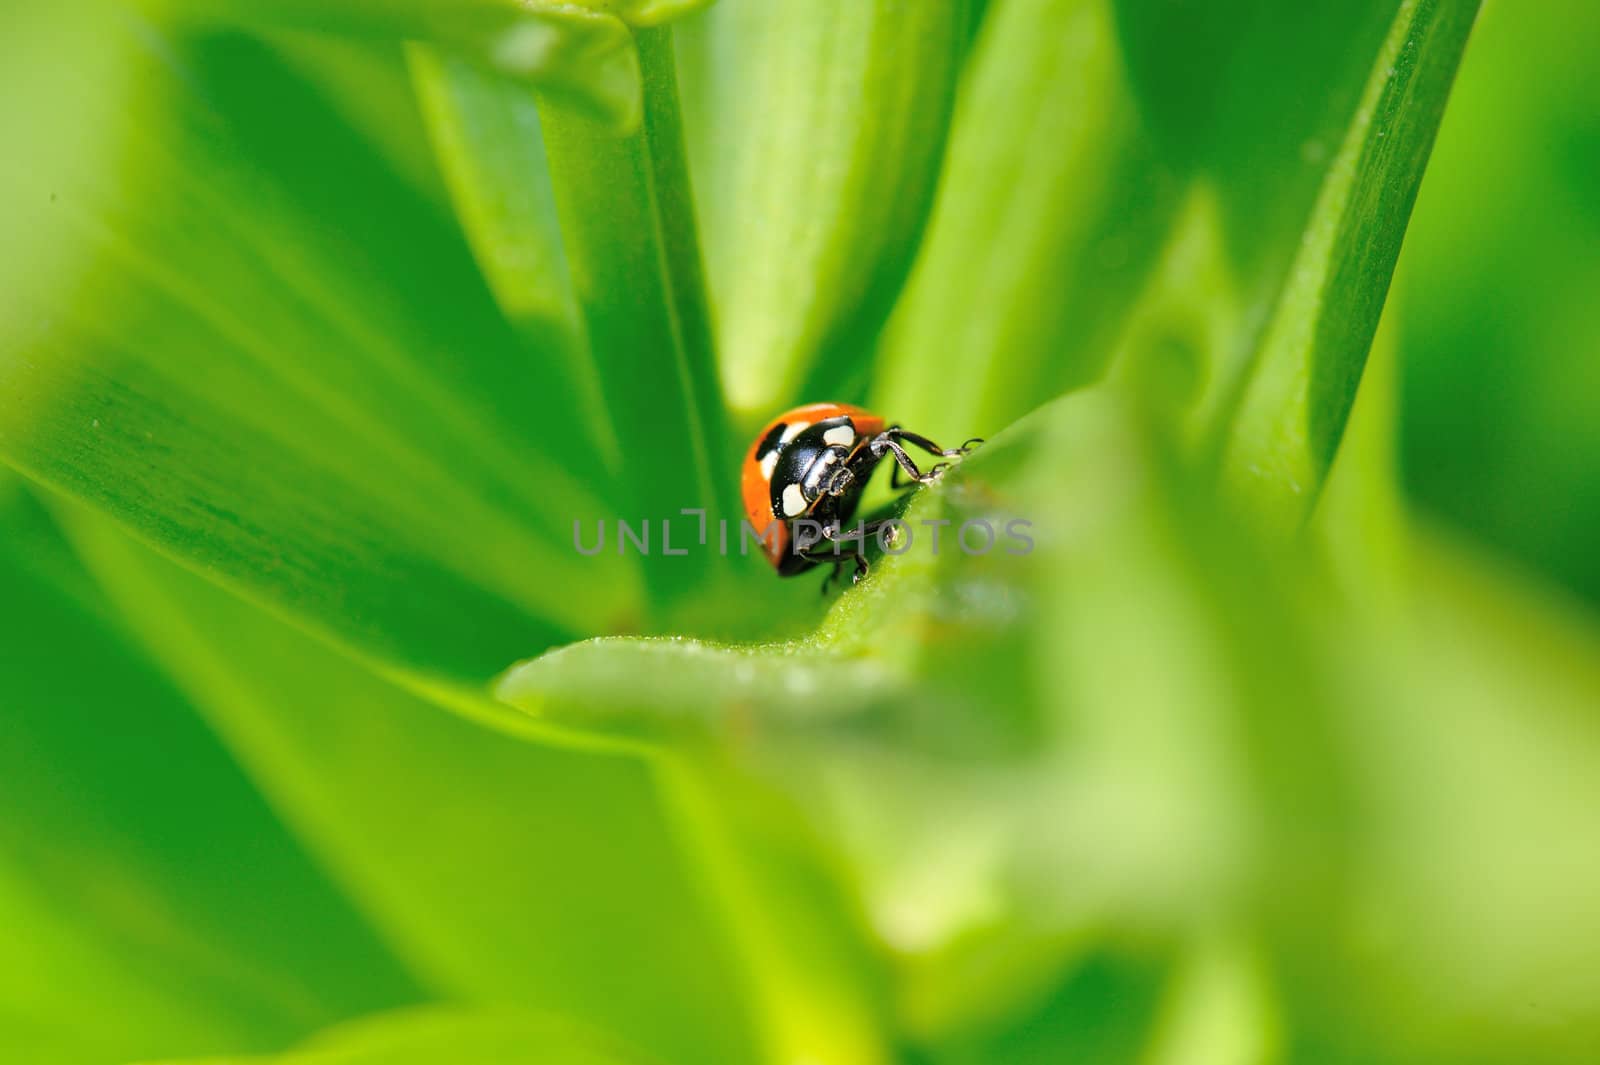 A ladybug between bright green leaves.